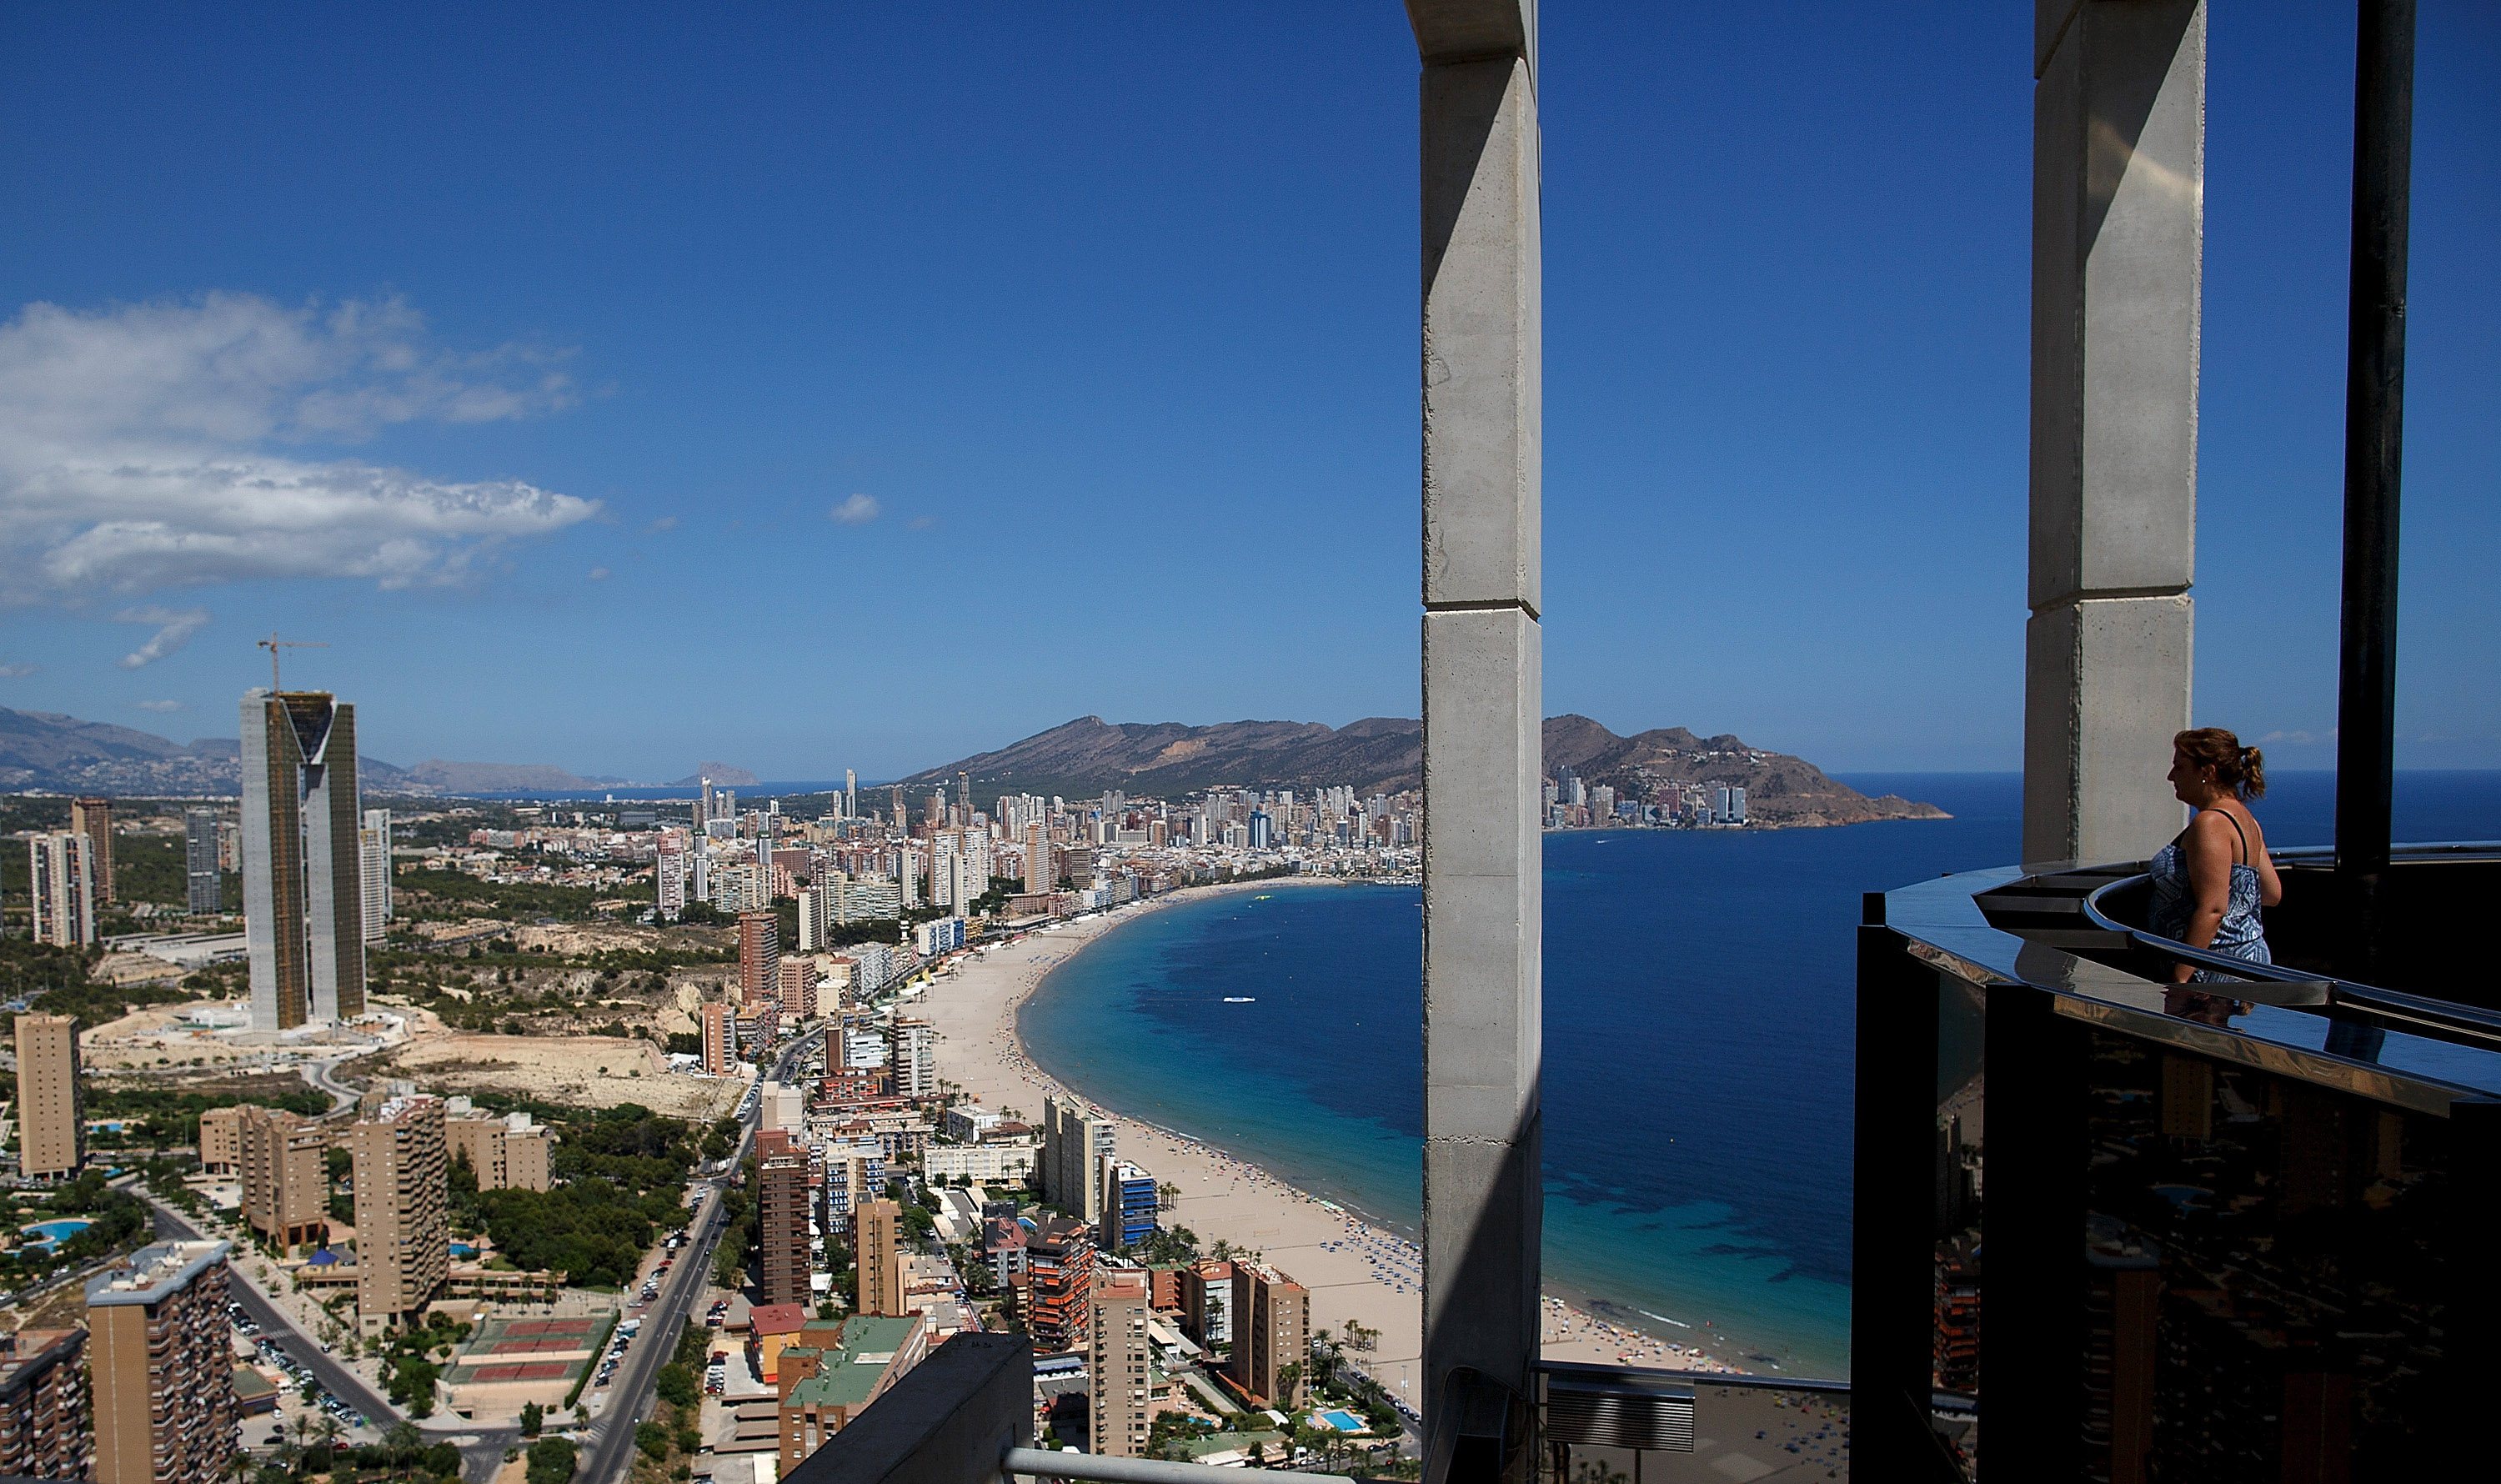 The InTempo Towers In Benidorm Remain Half Built Due To The Faltering Spanish Economy